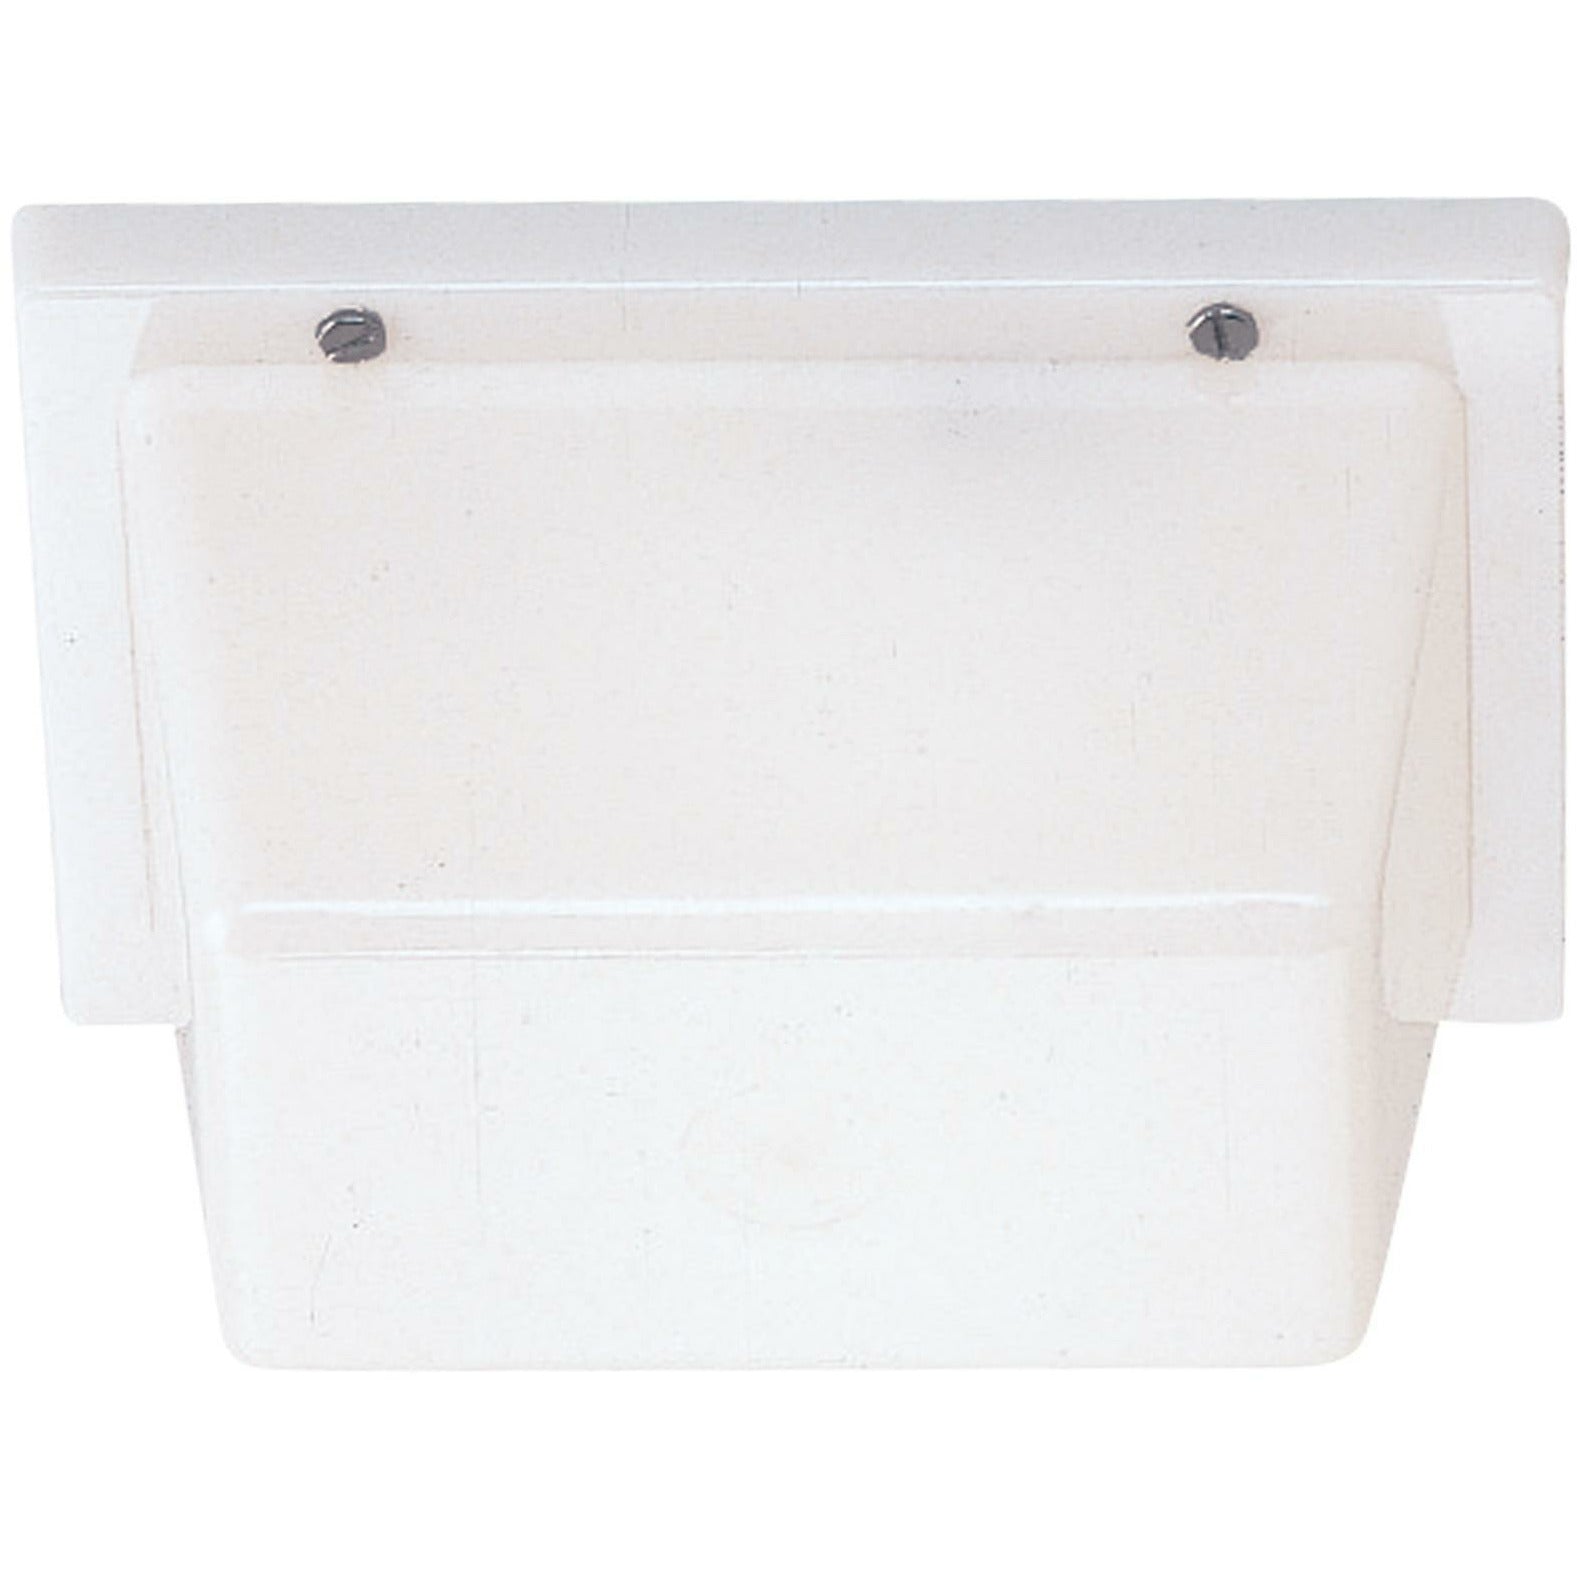 Ceiling / Wall Mount Outdoor Light White Plastic